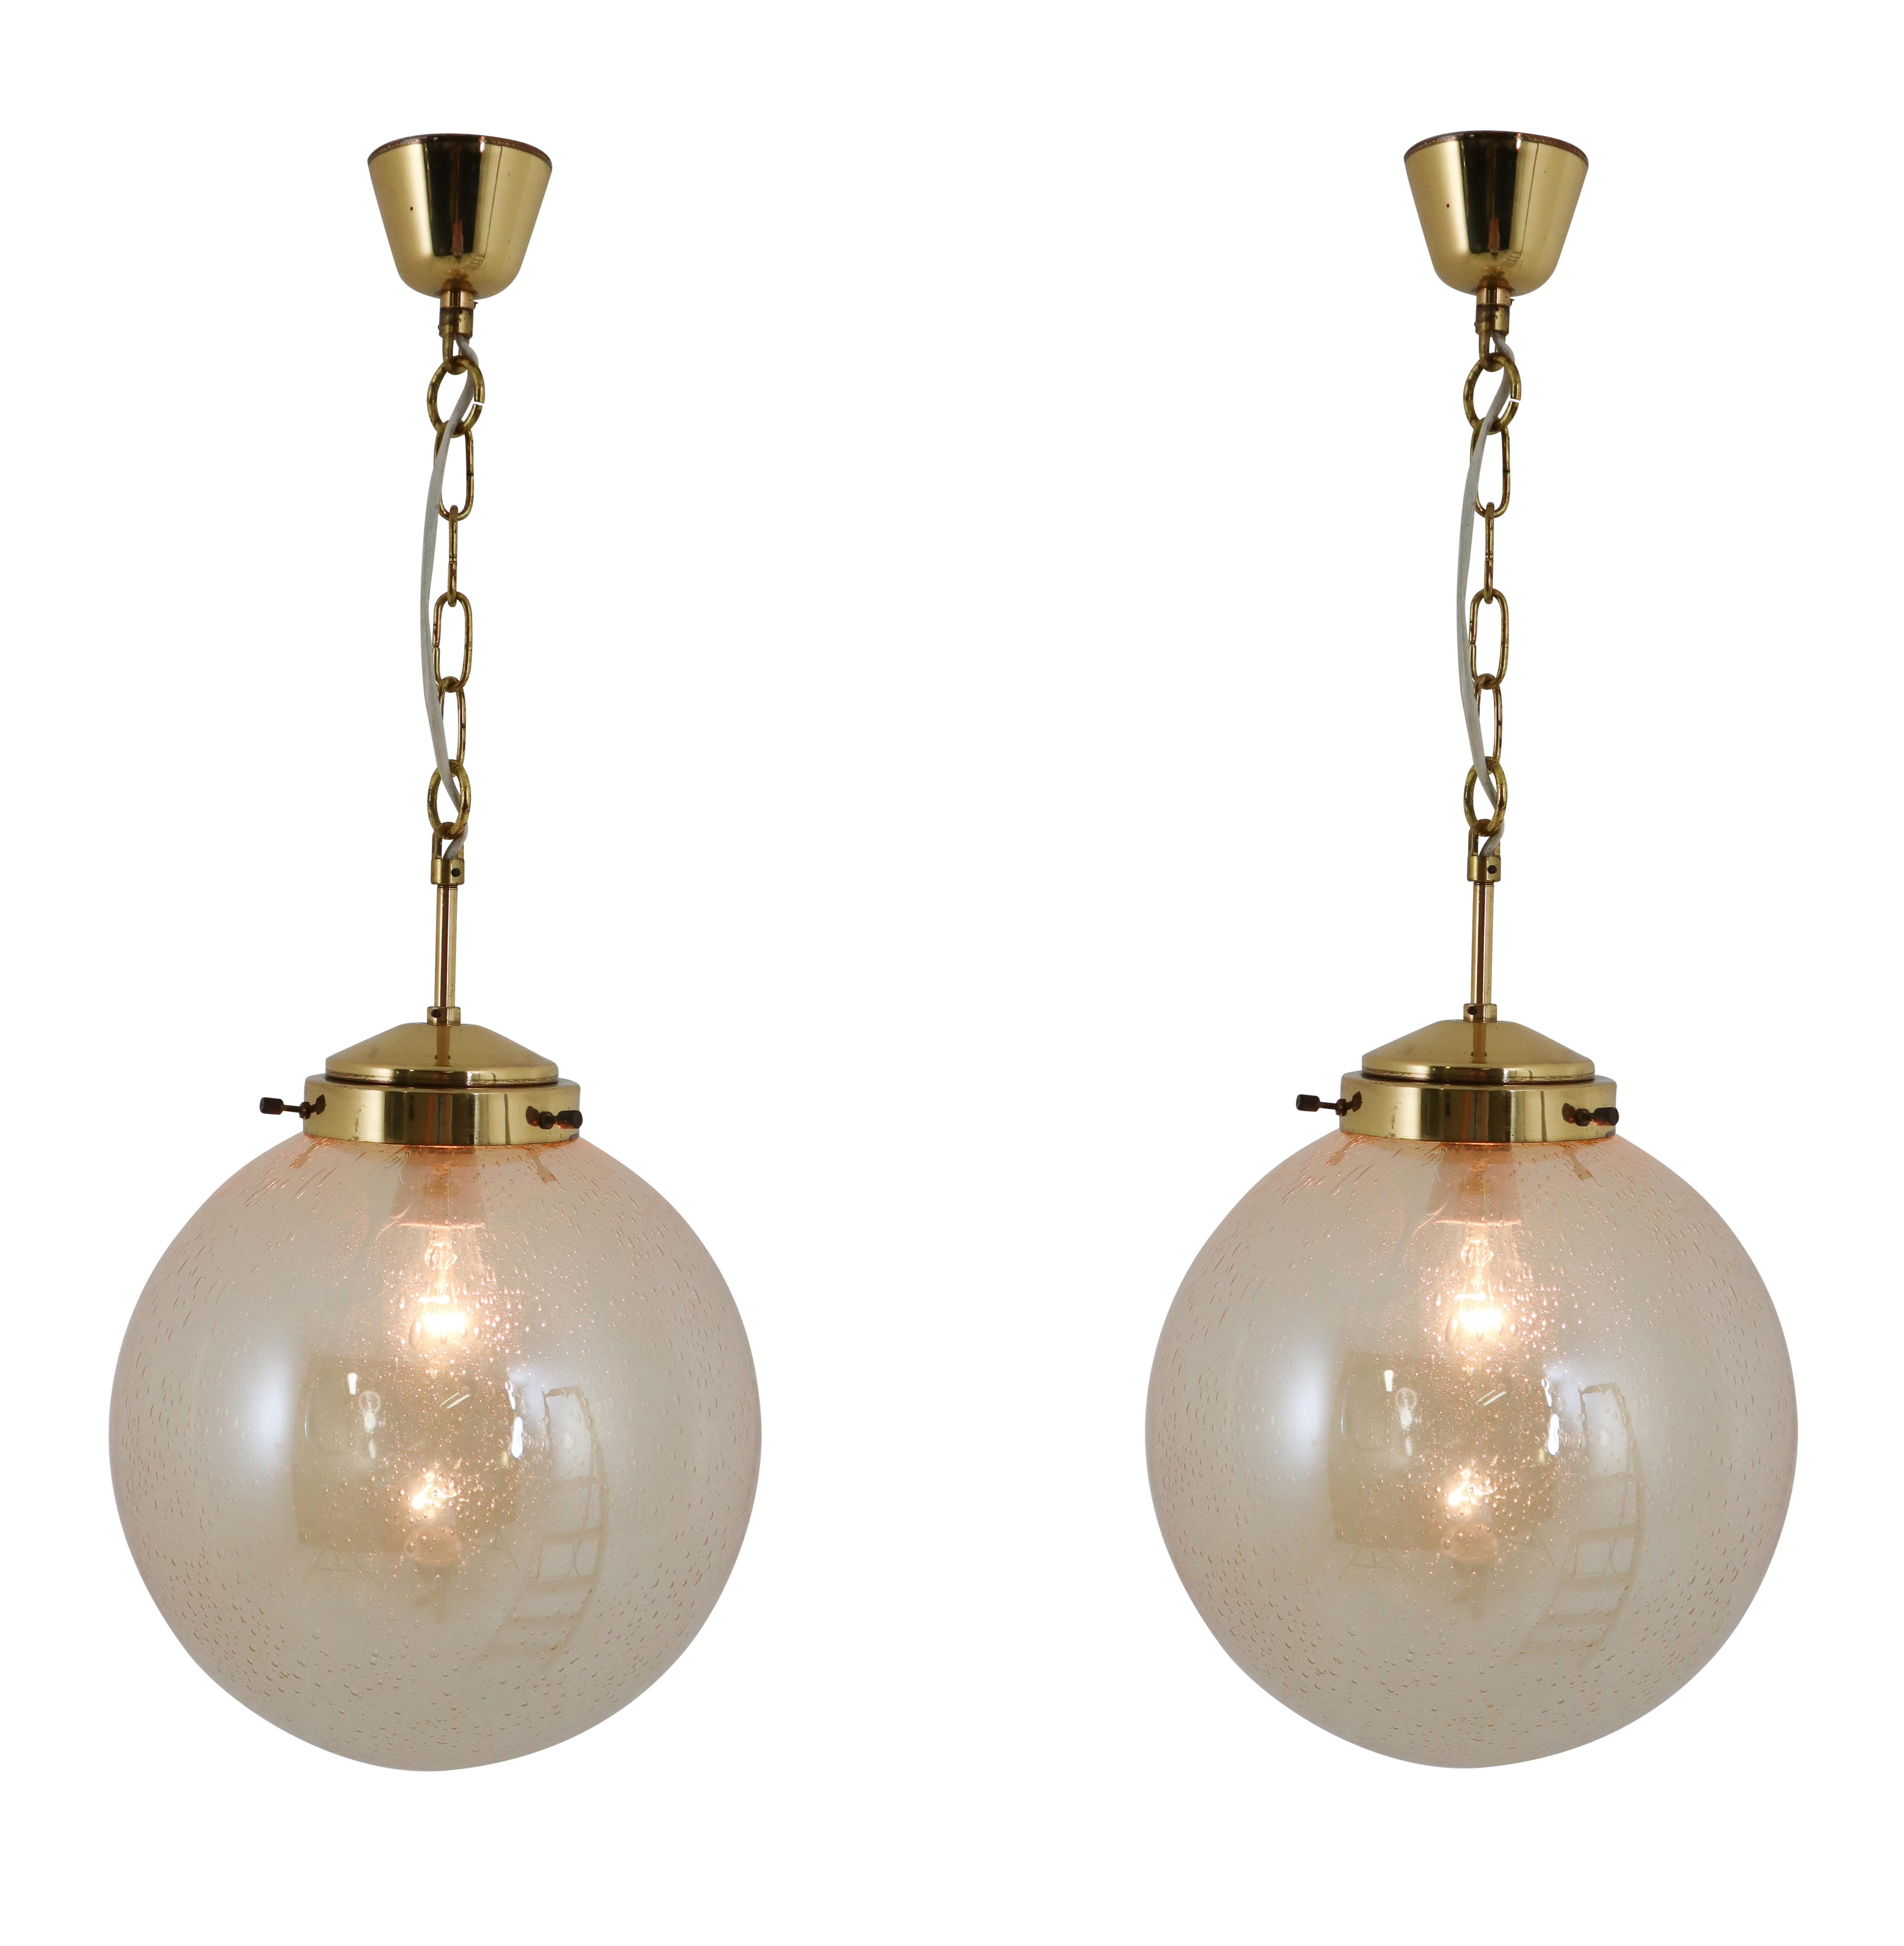 Set of Two Globe Pendant Lights, Brass and Smoked Glass, 1970s For Sale